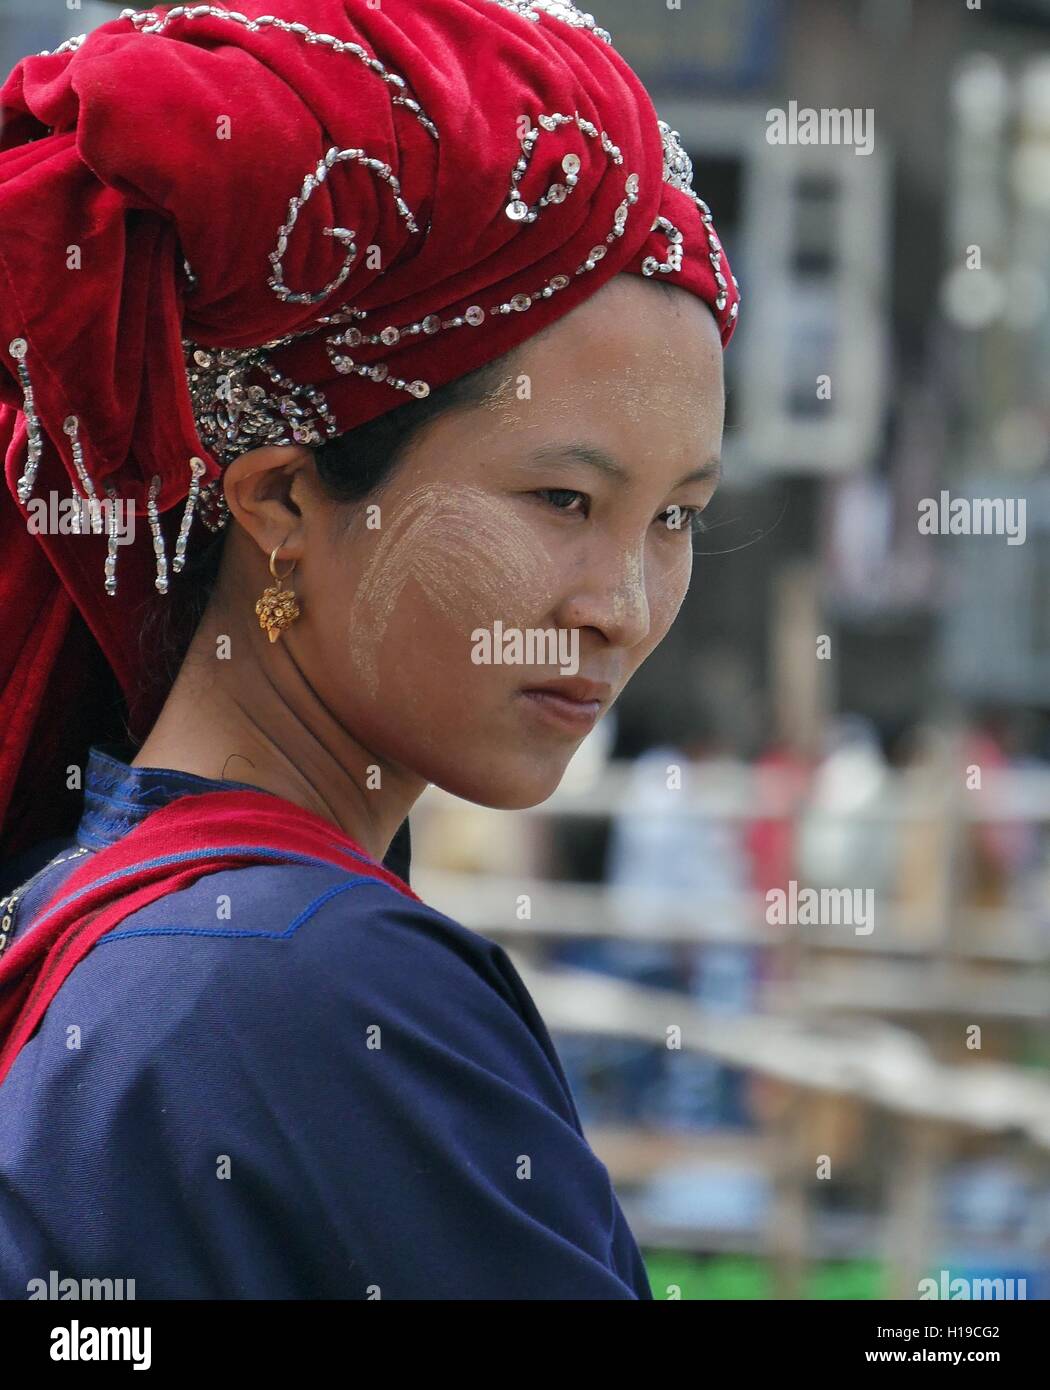 Close up of Pa-O woman wearing special headdress typical of that ethnic group at Phaung Daw Oo Pagoda Festival, Inle Lake, Shan State, Myanmar (Burma) Stock Photo